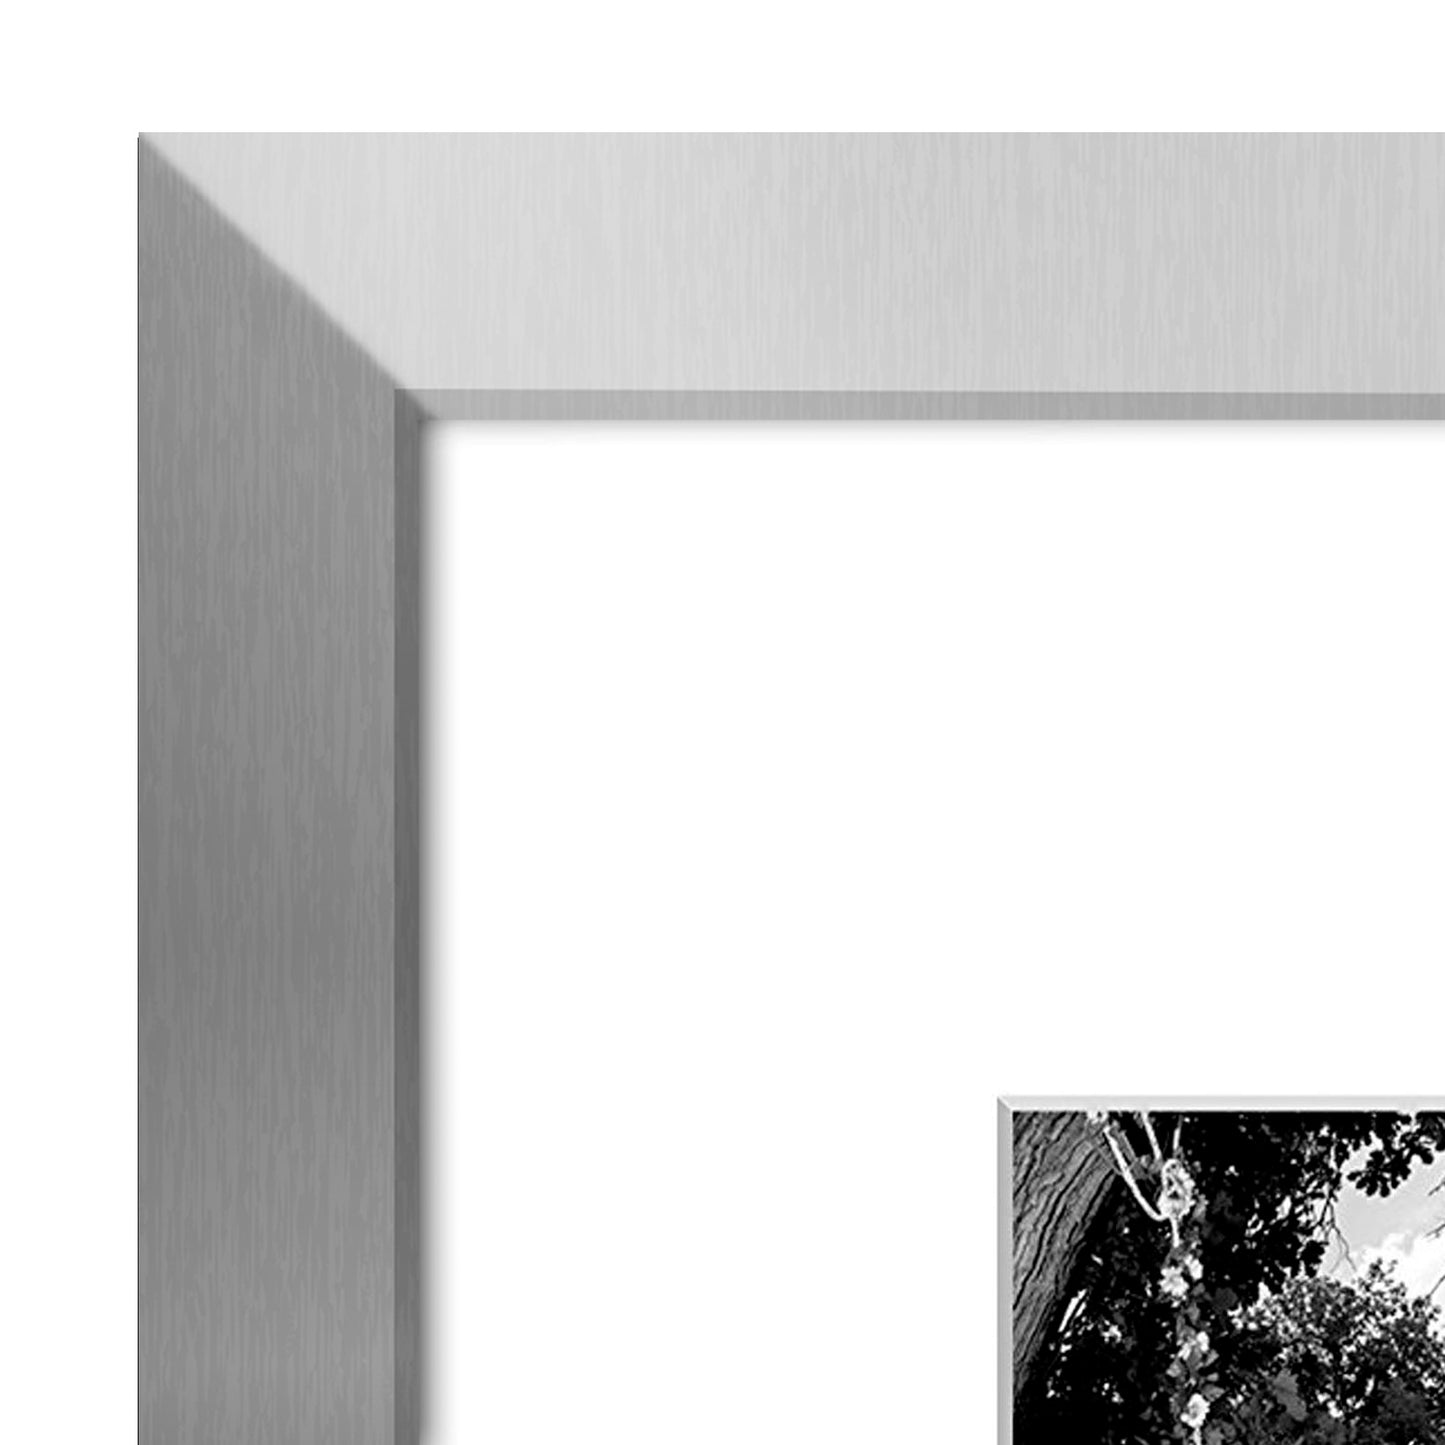 11x14 in Silver - With Shatter Resistant Glass, and Includes Hanging Hardware for Wall - Picture Frame